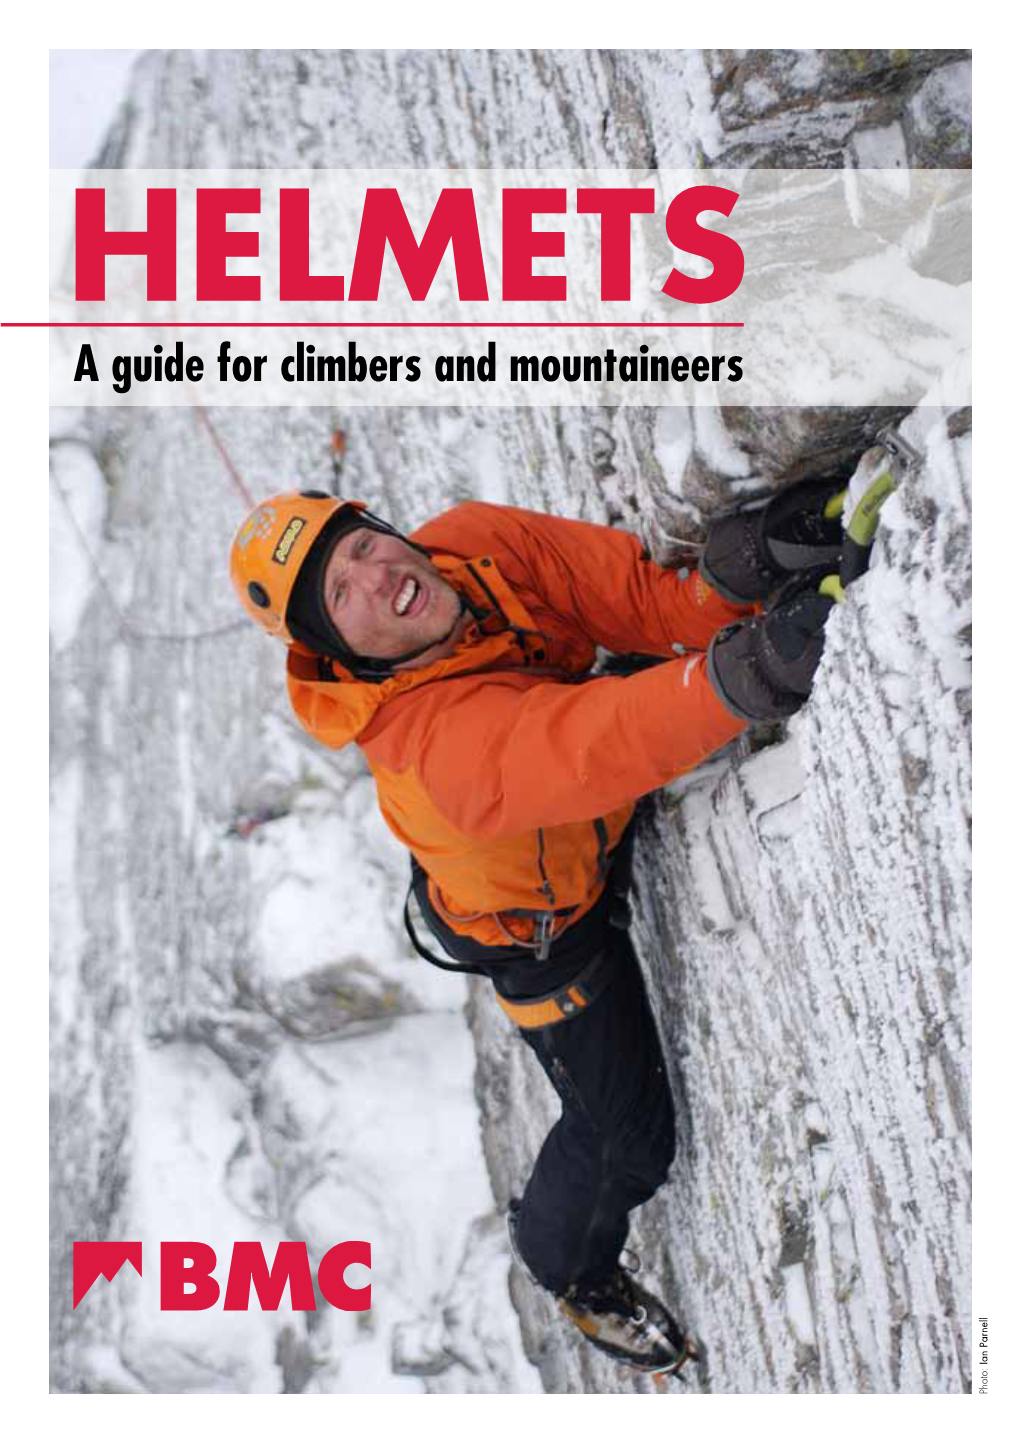 Helmets a Guide for Climbers and Mountaineers Photo: Ian Parnell Helmets a Guide for Climbers and Mountaineers